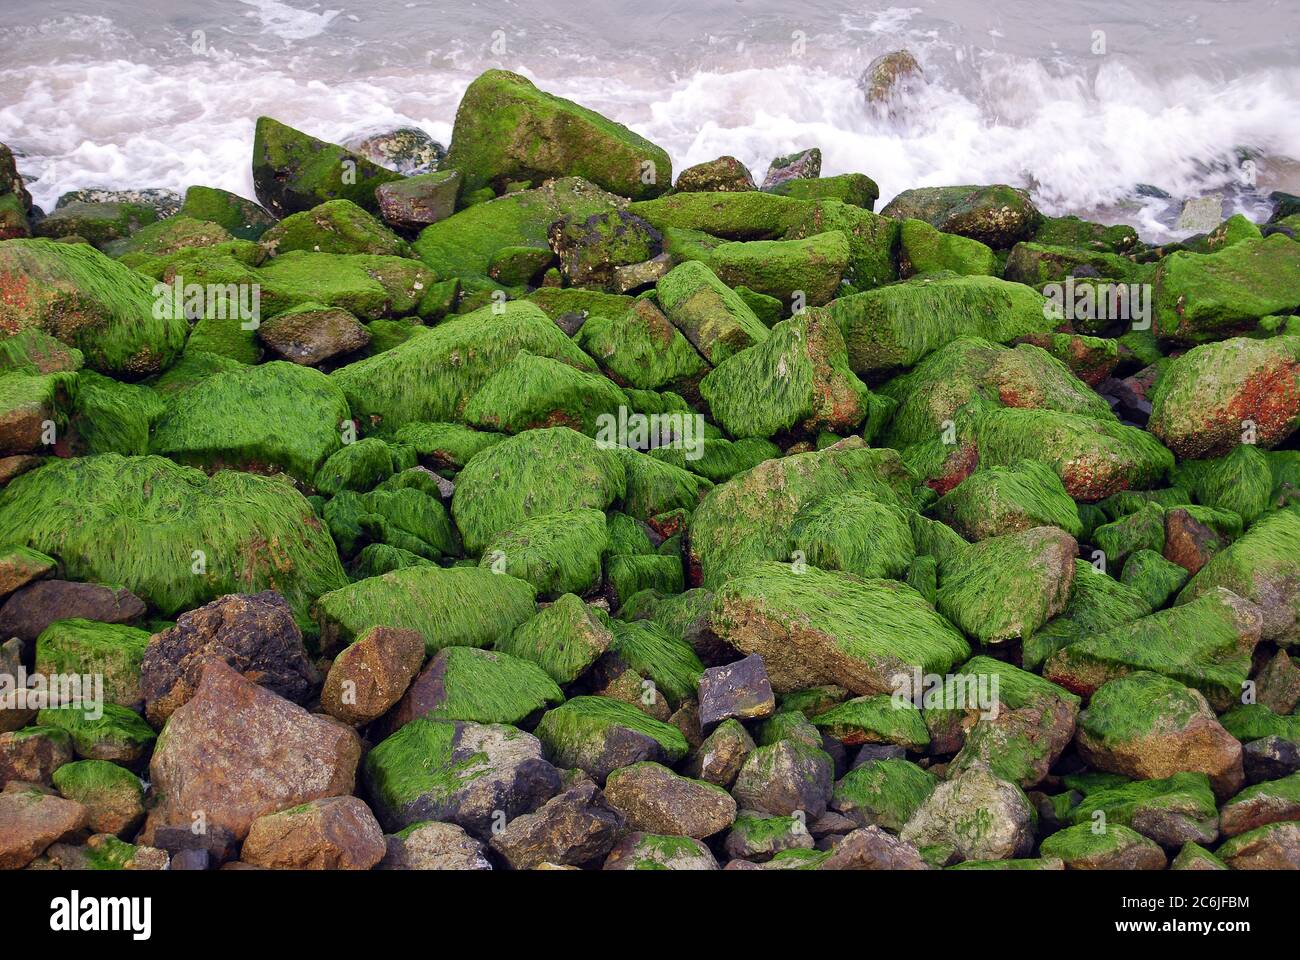 Stones covered with seaweed at low tide Stock Photo